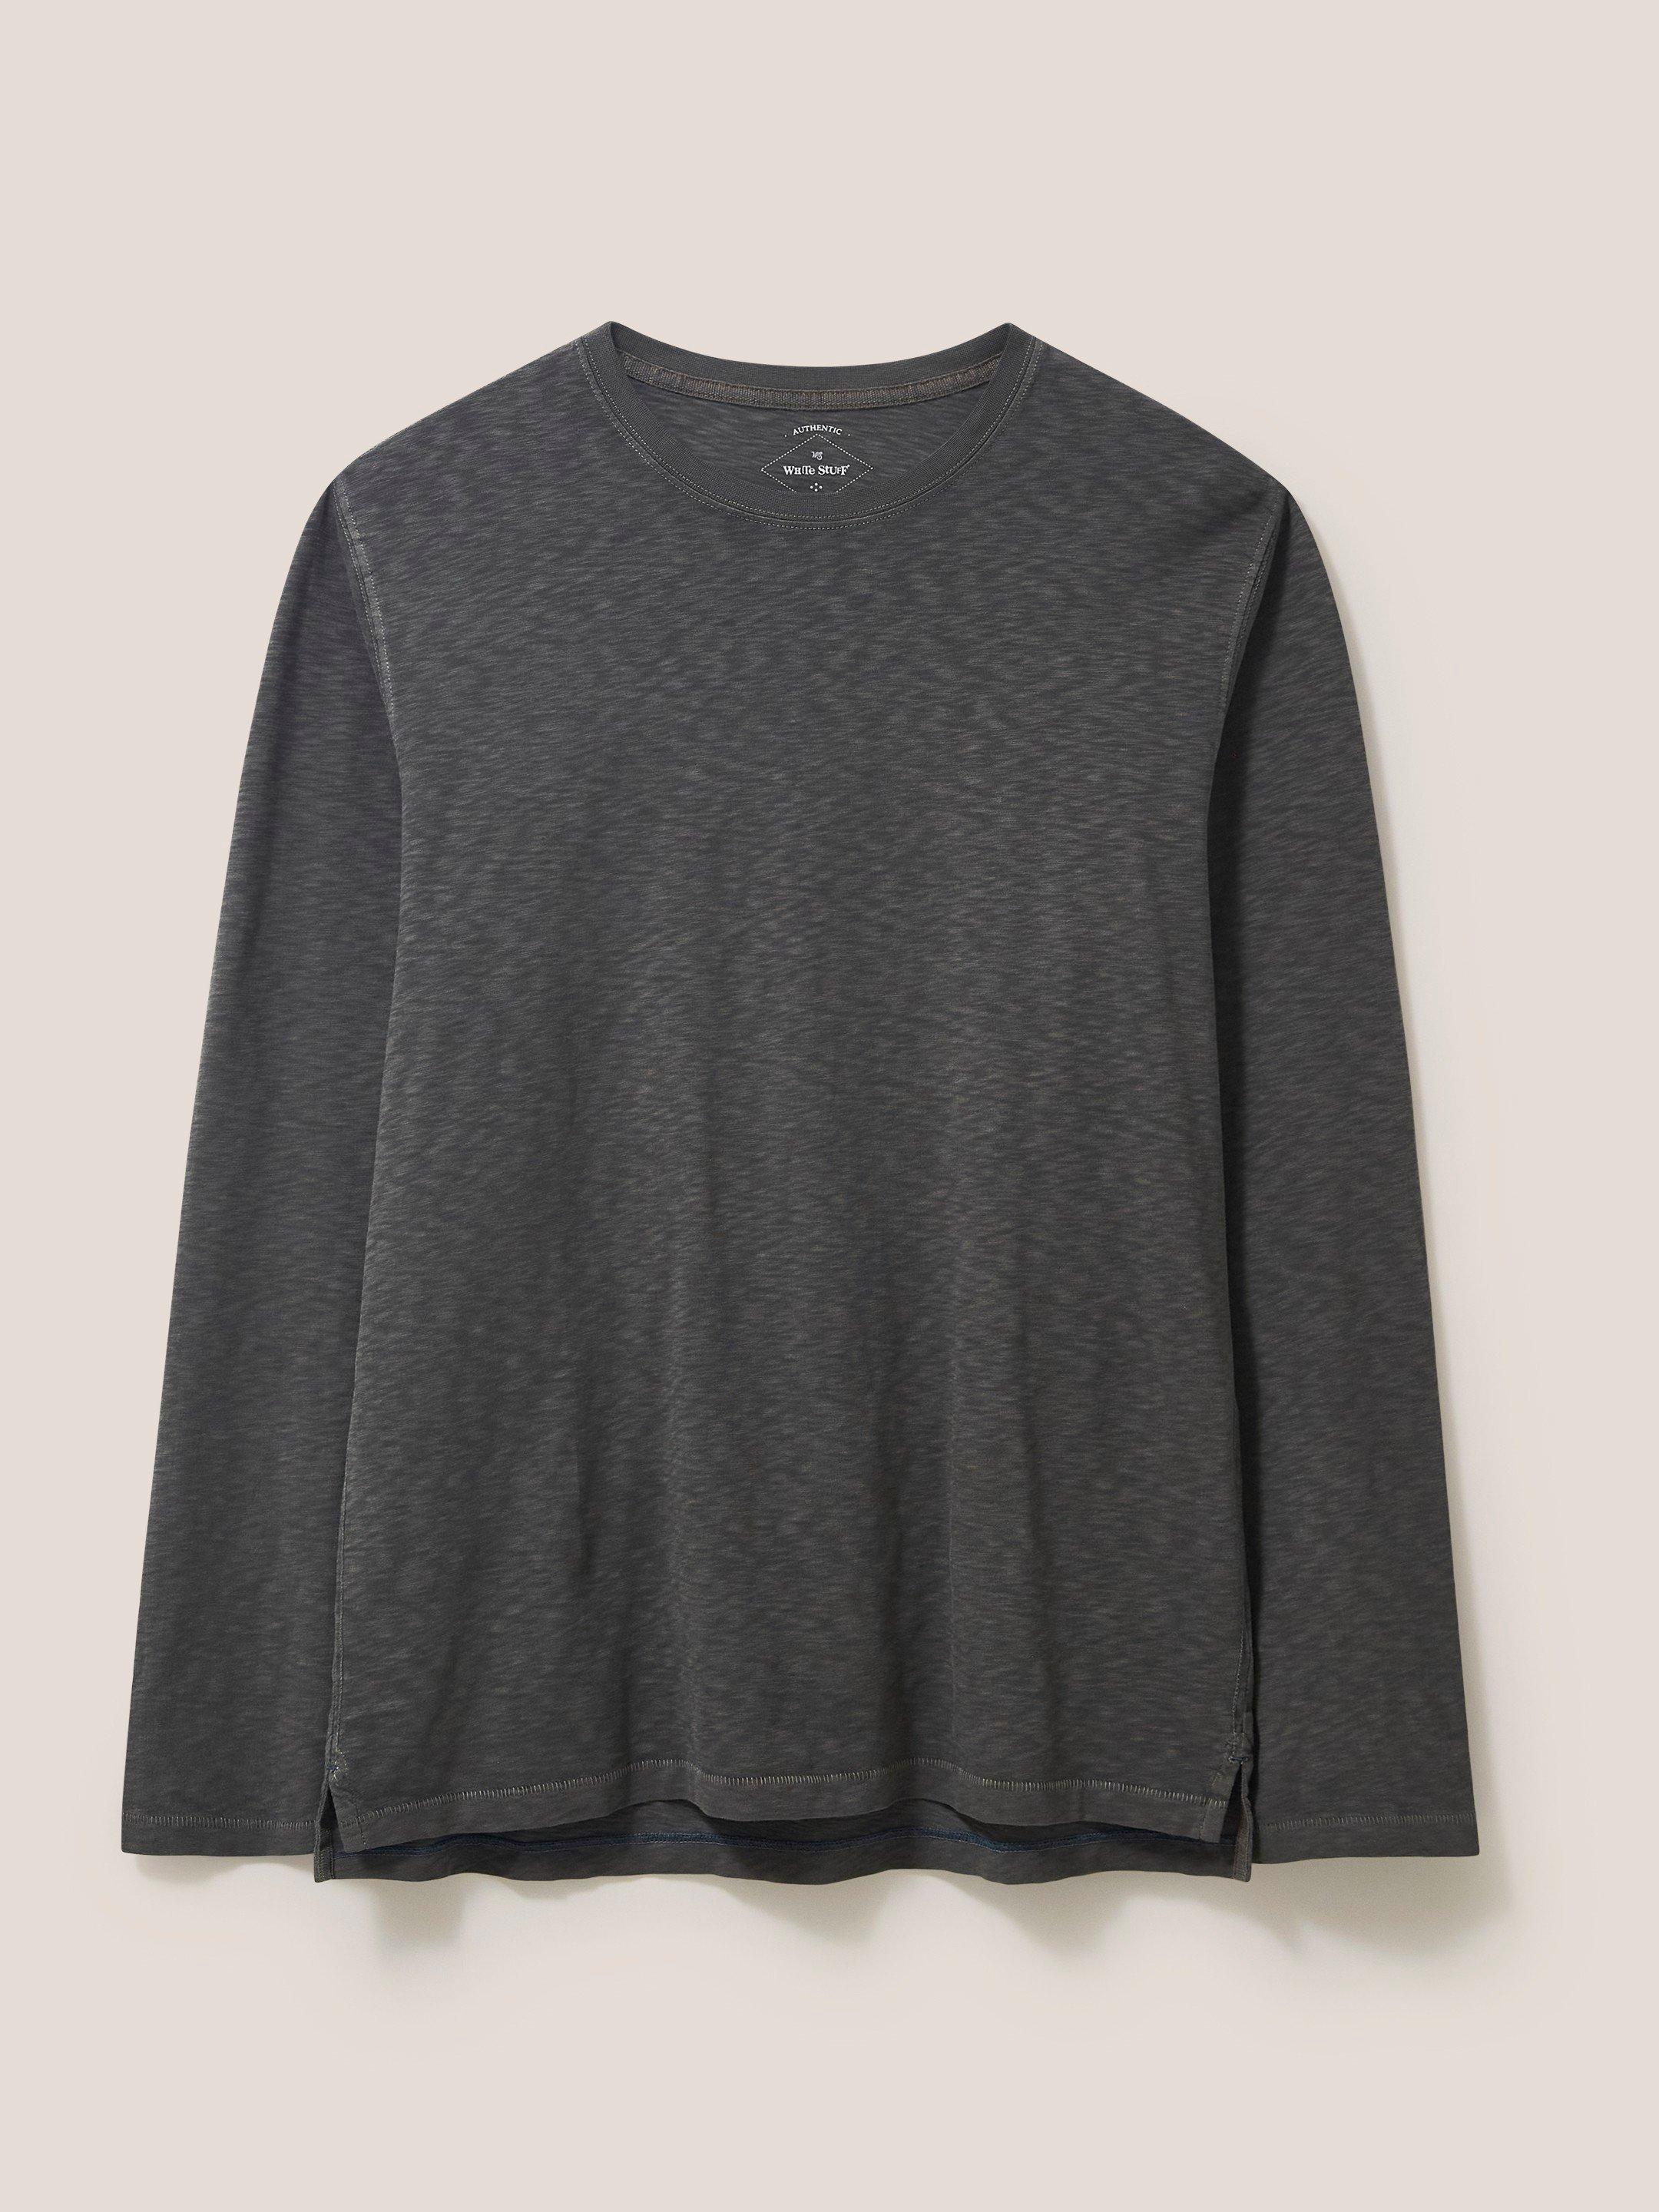 Long Sleeve Abersoch Tee in WASHED BLK - FLAT FRONT